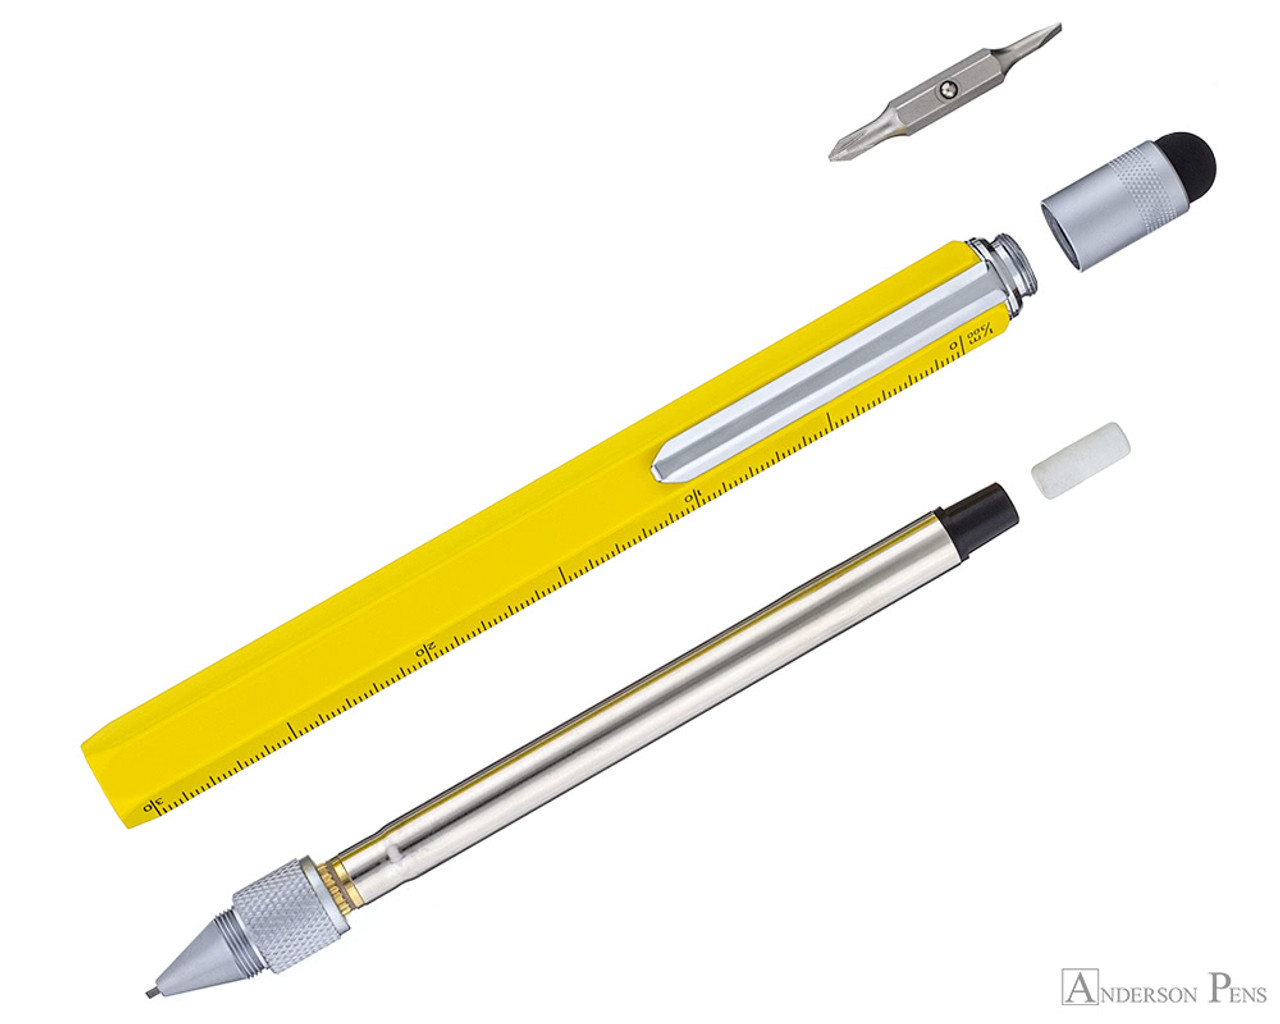 https://cdn11.bigcommerce.com/s-of7asuzbtu/images/stencil/1280x1280/products/16787/88102/Monteverde-ToolPencilwithStylus-Yellow-Pencil_PartedOut__66364.1680533802.jpg?c=2